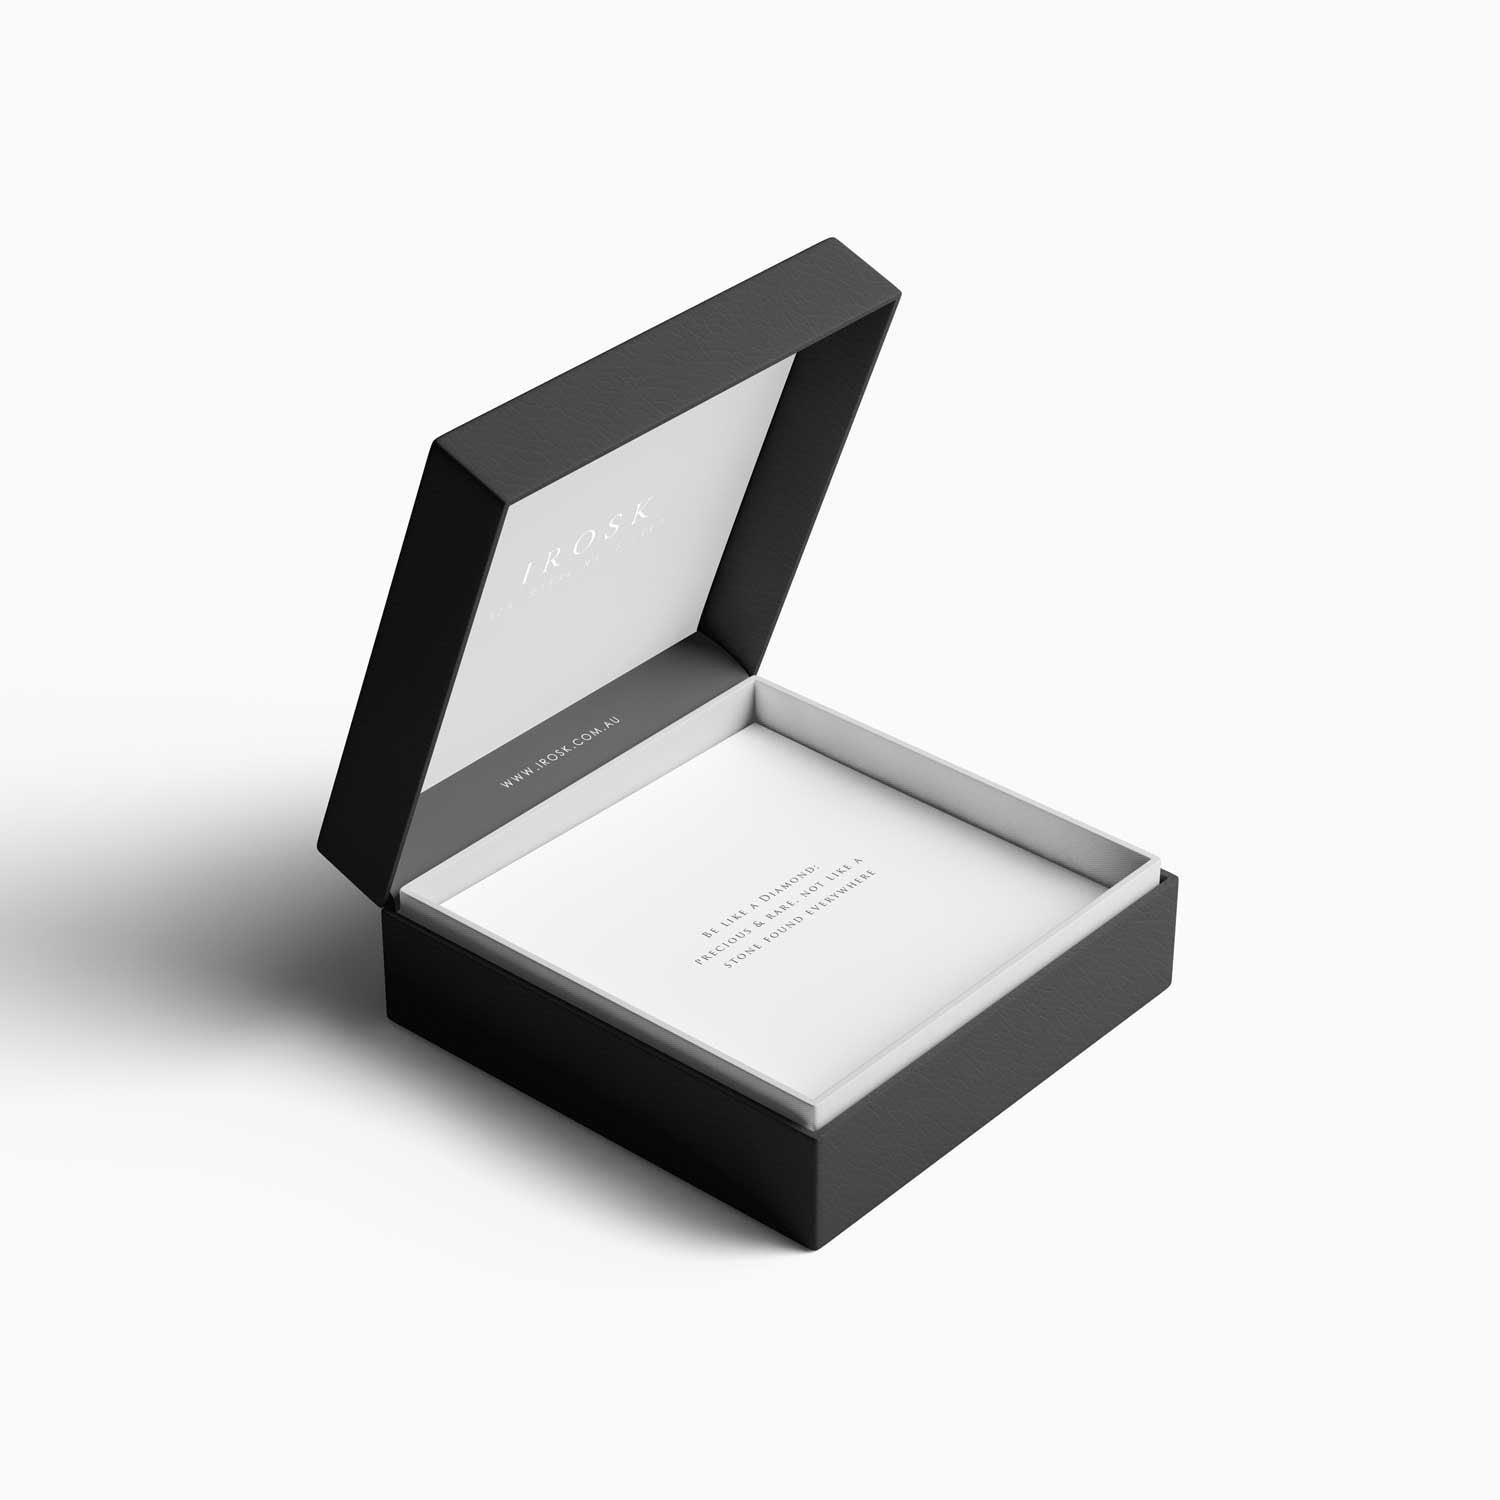 photo of luxury jewelley box that comes complimentary with irosk jewellery